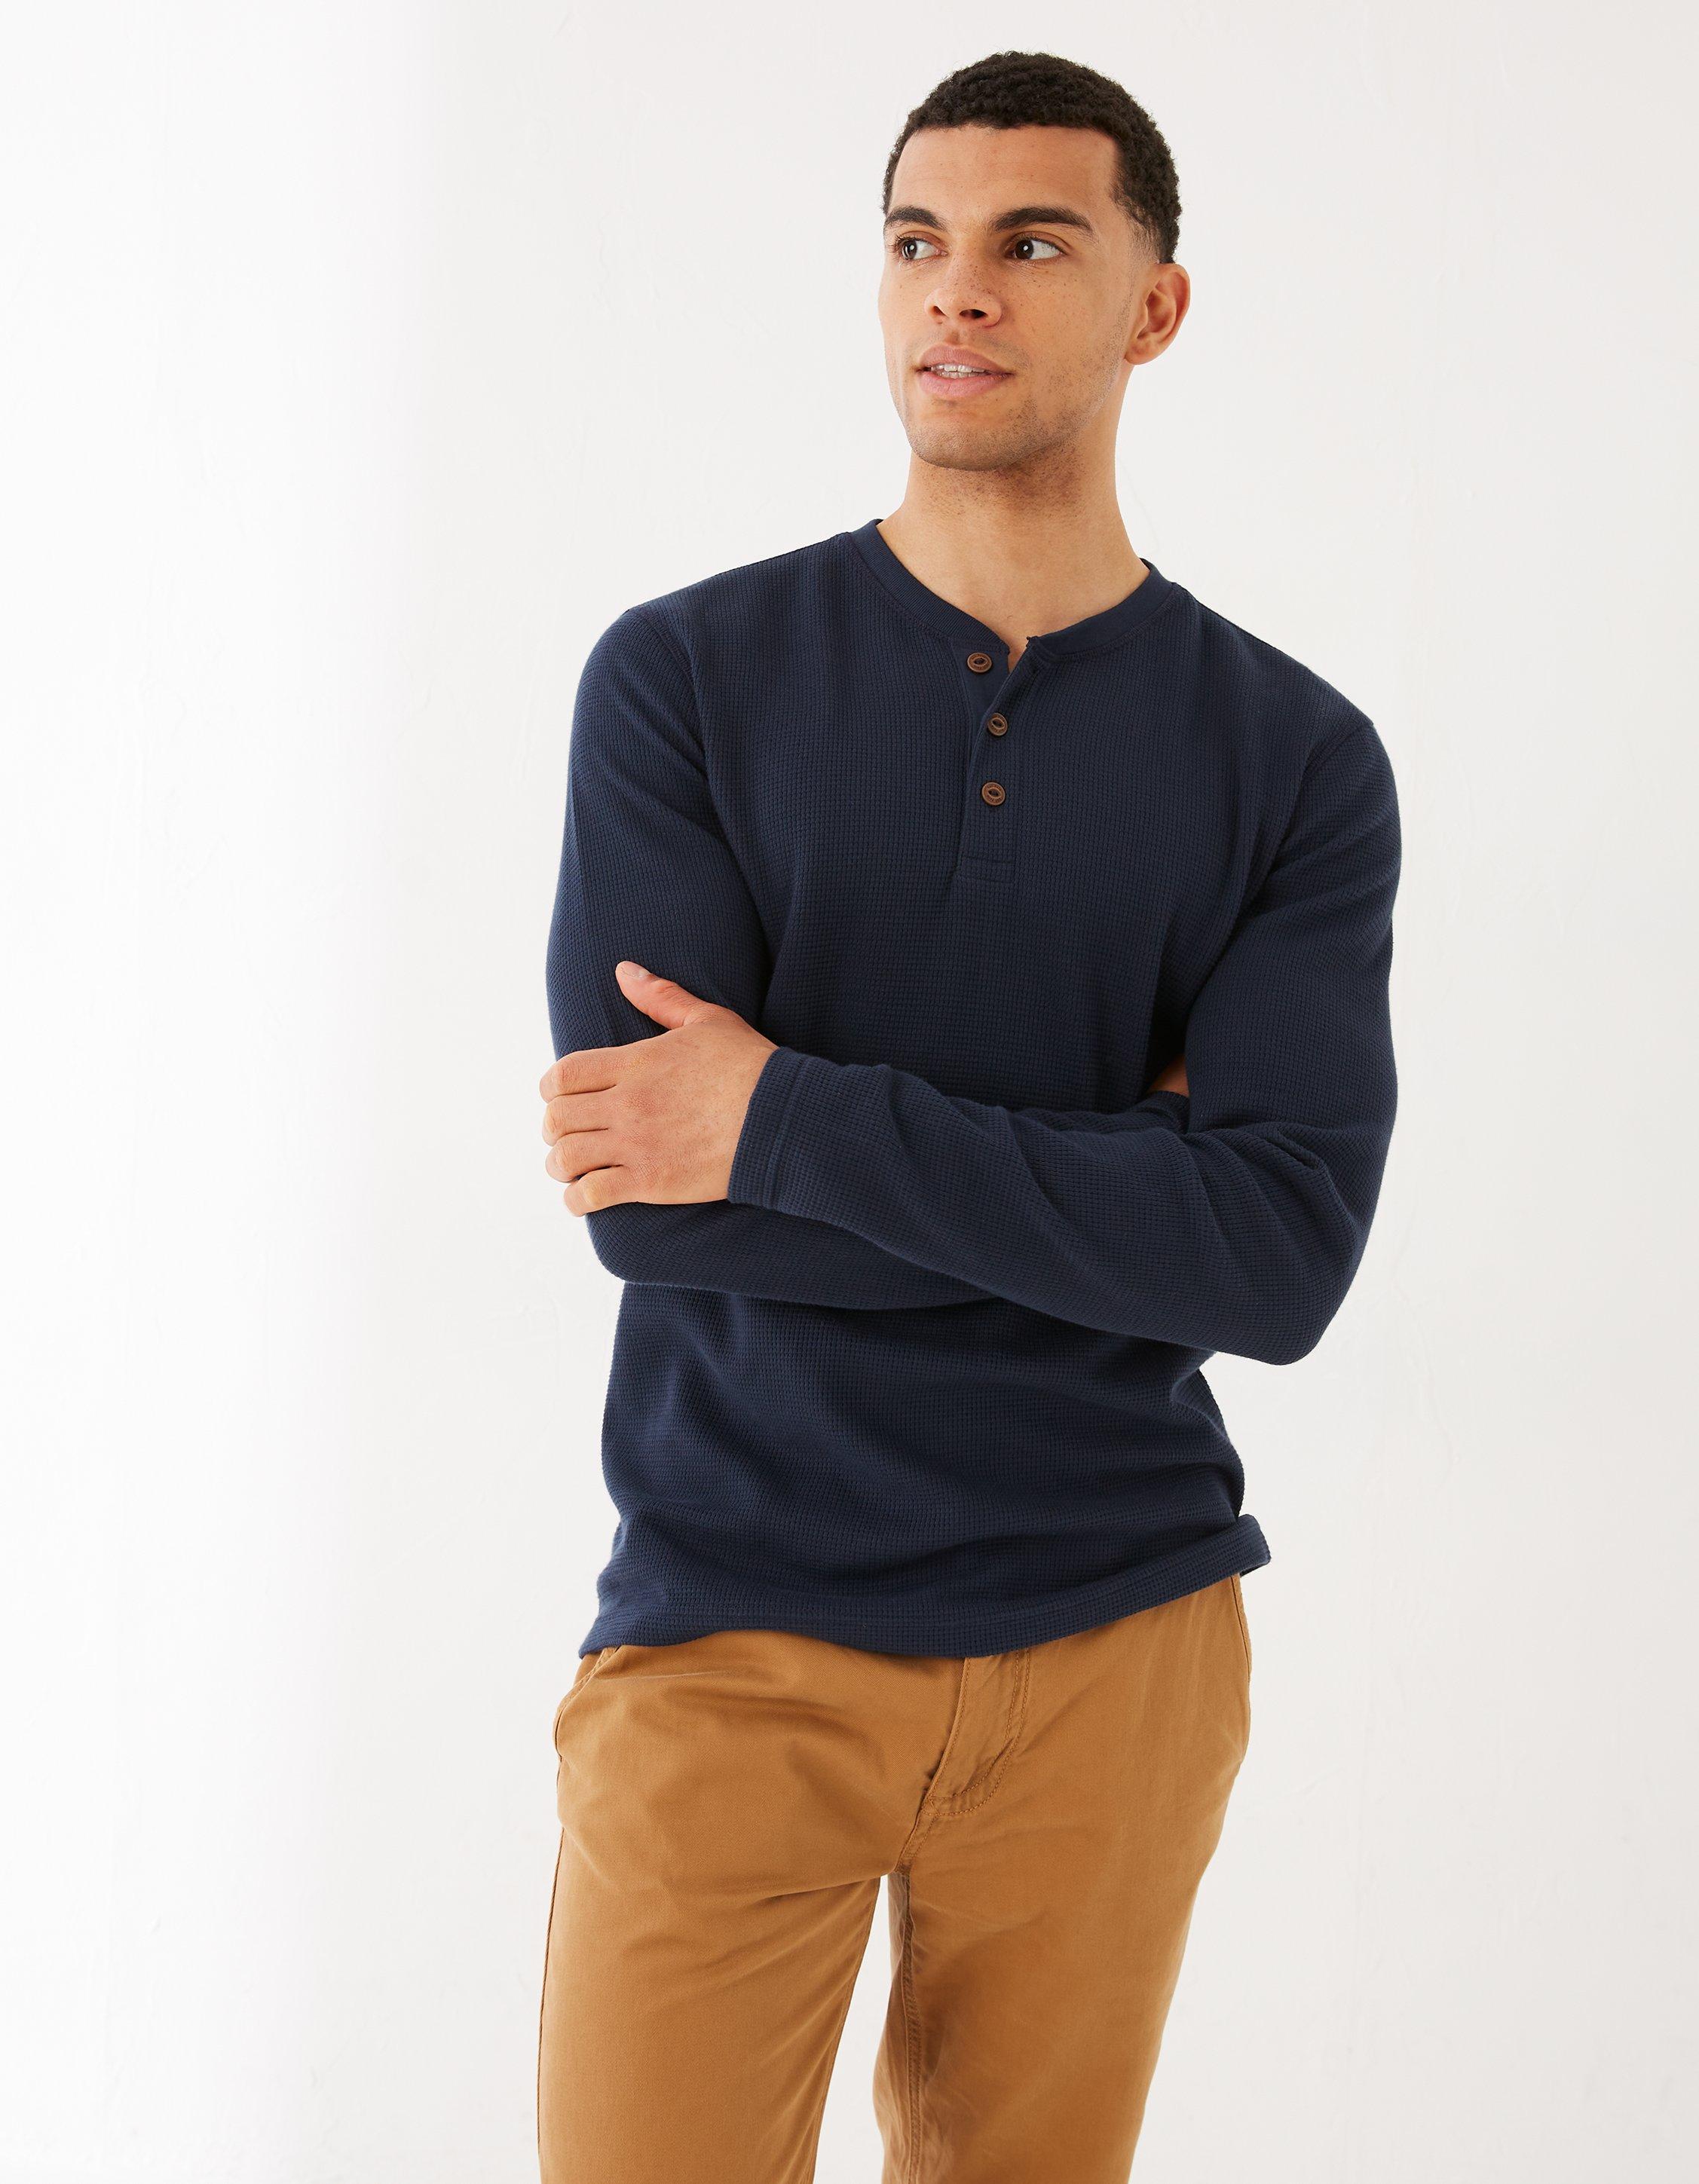 men's waffle henley shirts - OFF-50% >Free Delivery